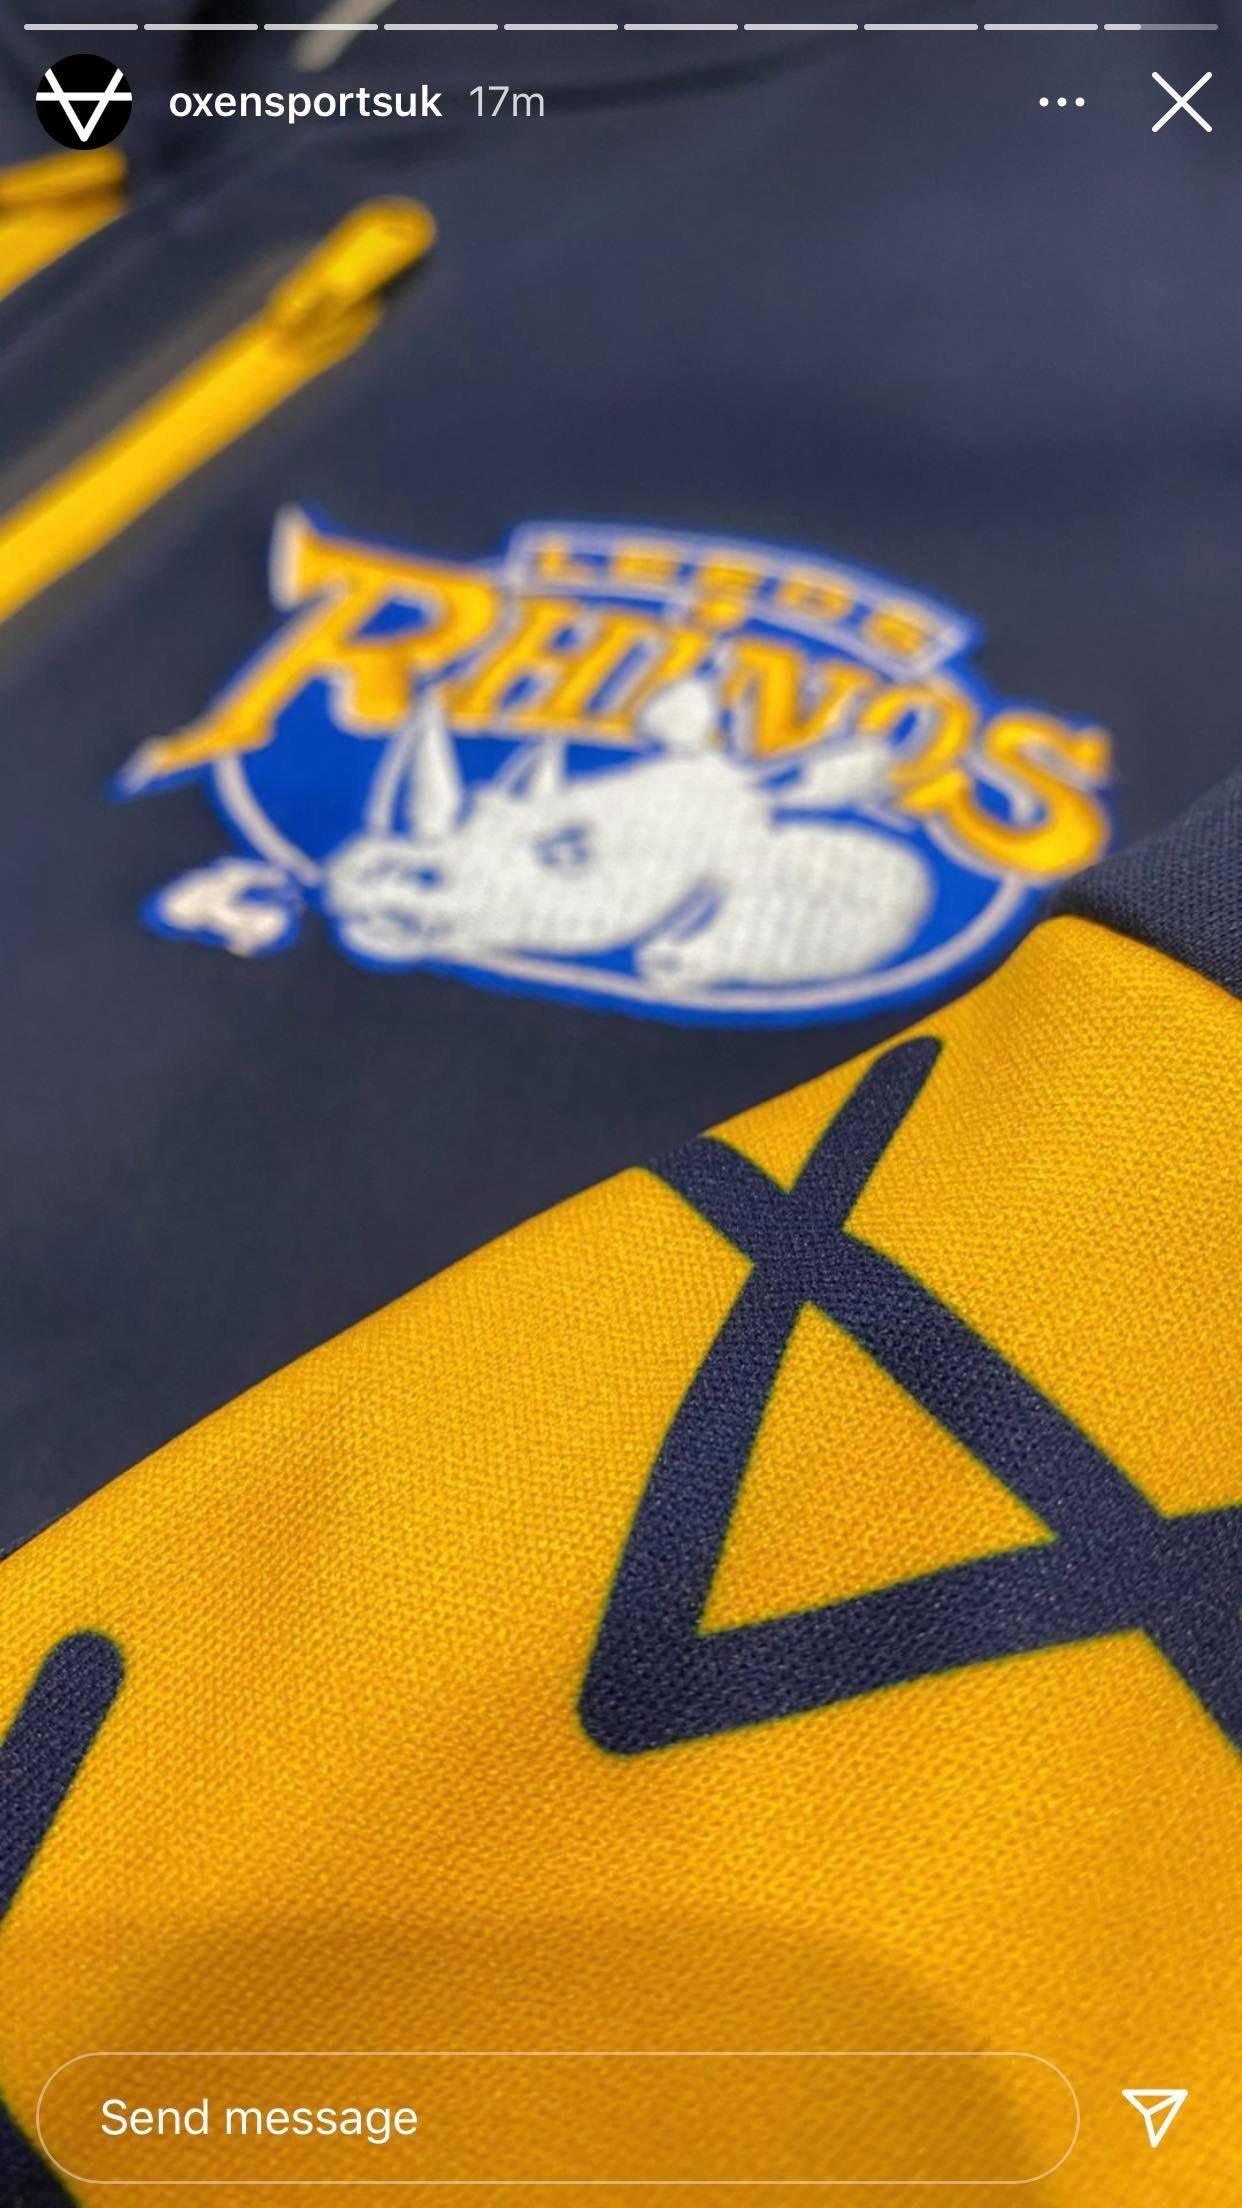 Oxen reveal sneak peak at new Rhinos kit - Serious About Rugby League